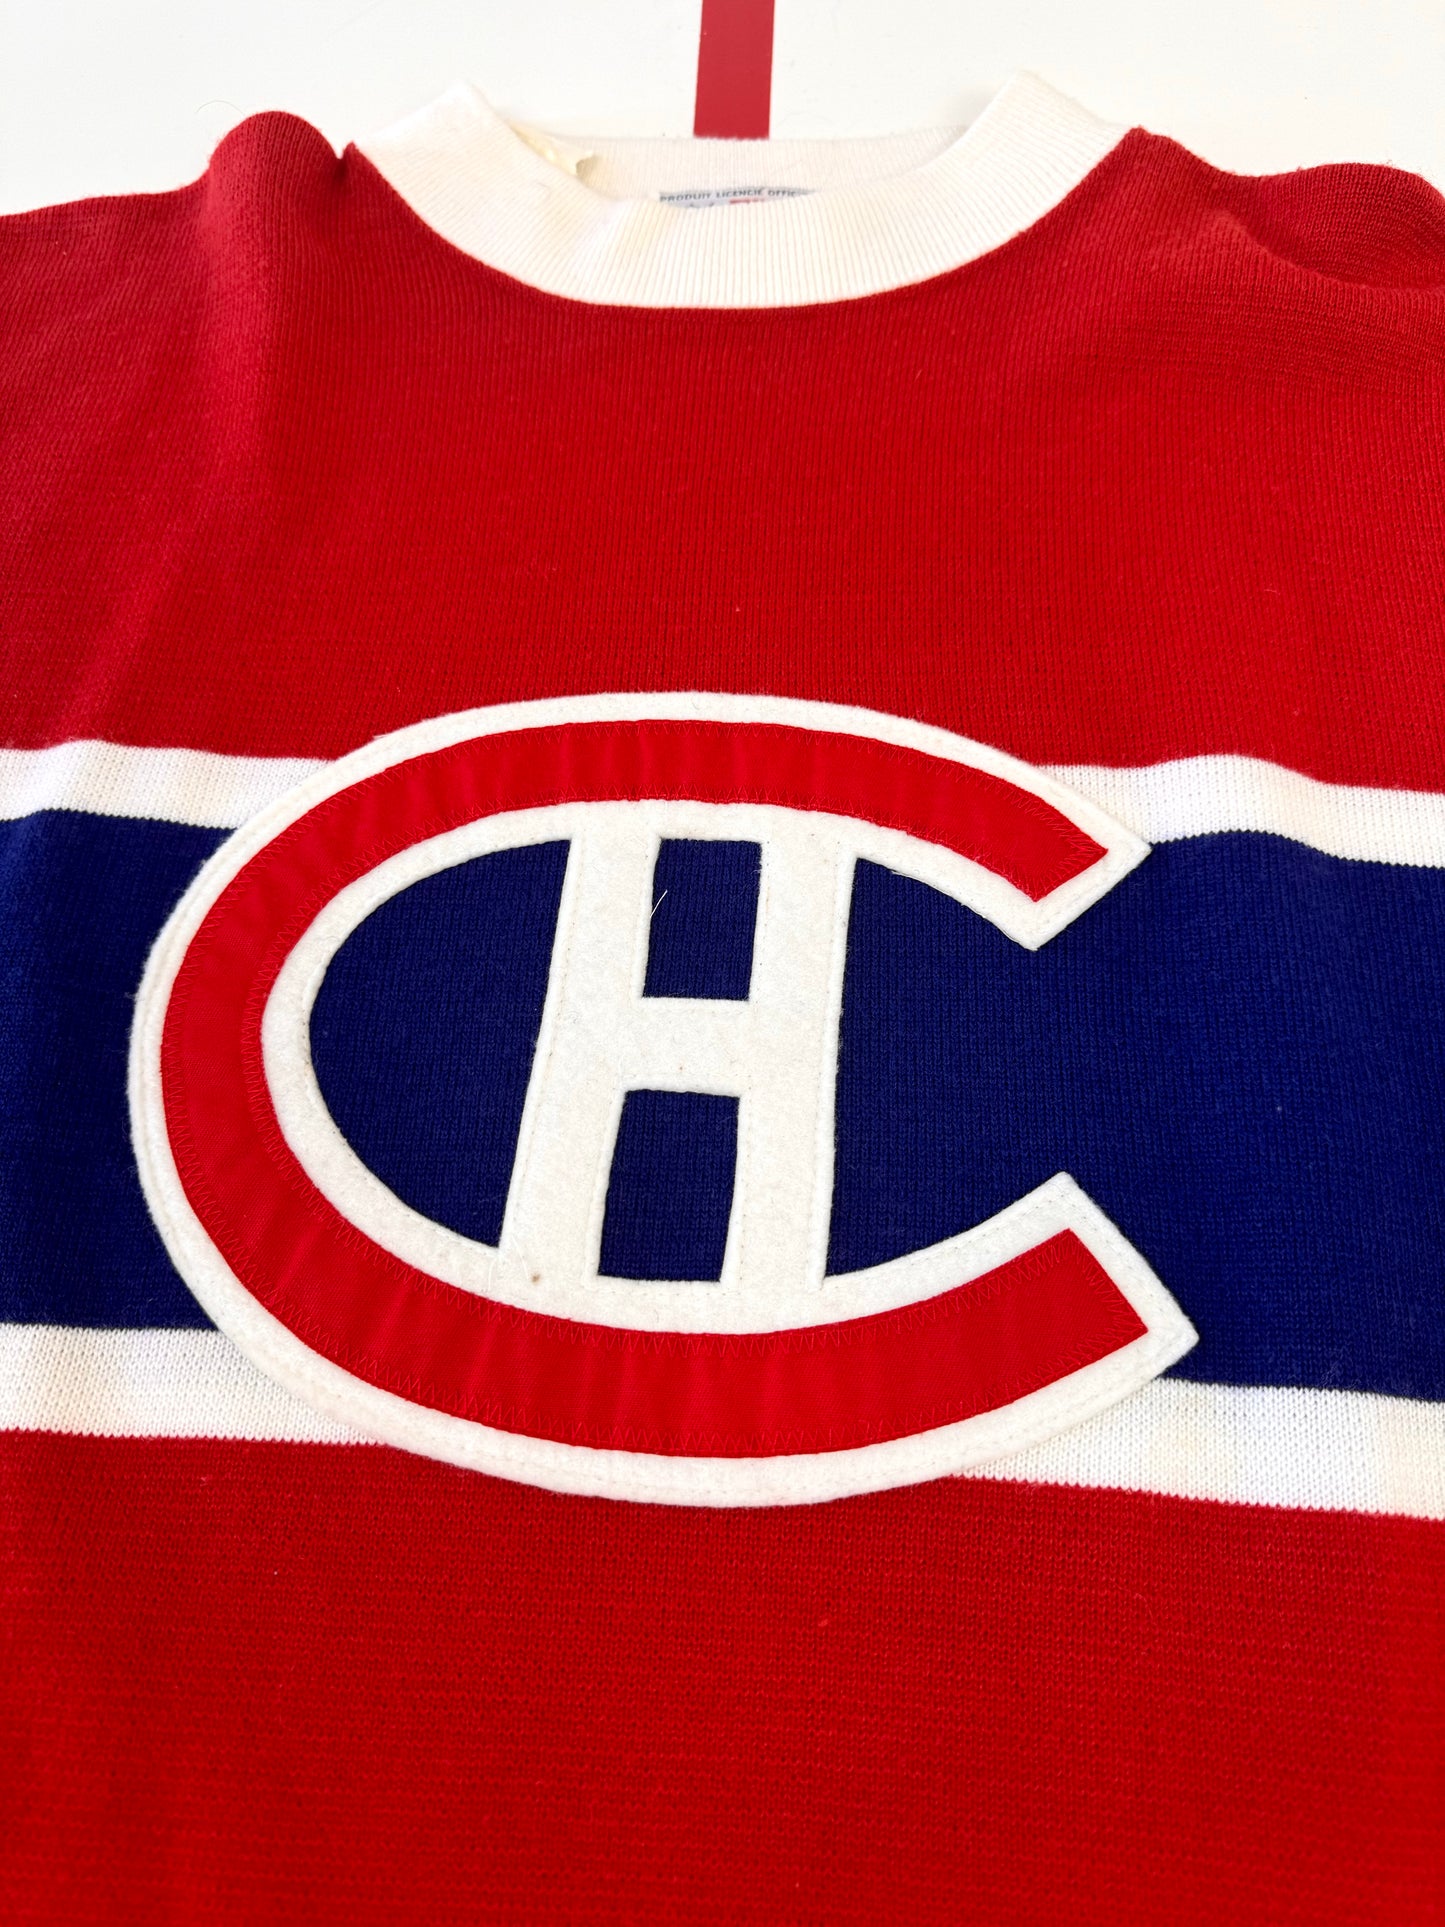 Montreal Canadiens 1934 NHL Hockey Jersey/Sweater (L/XL)